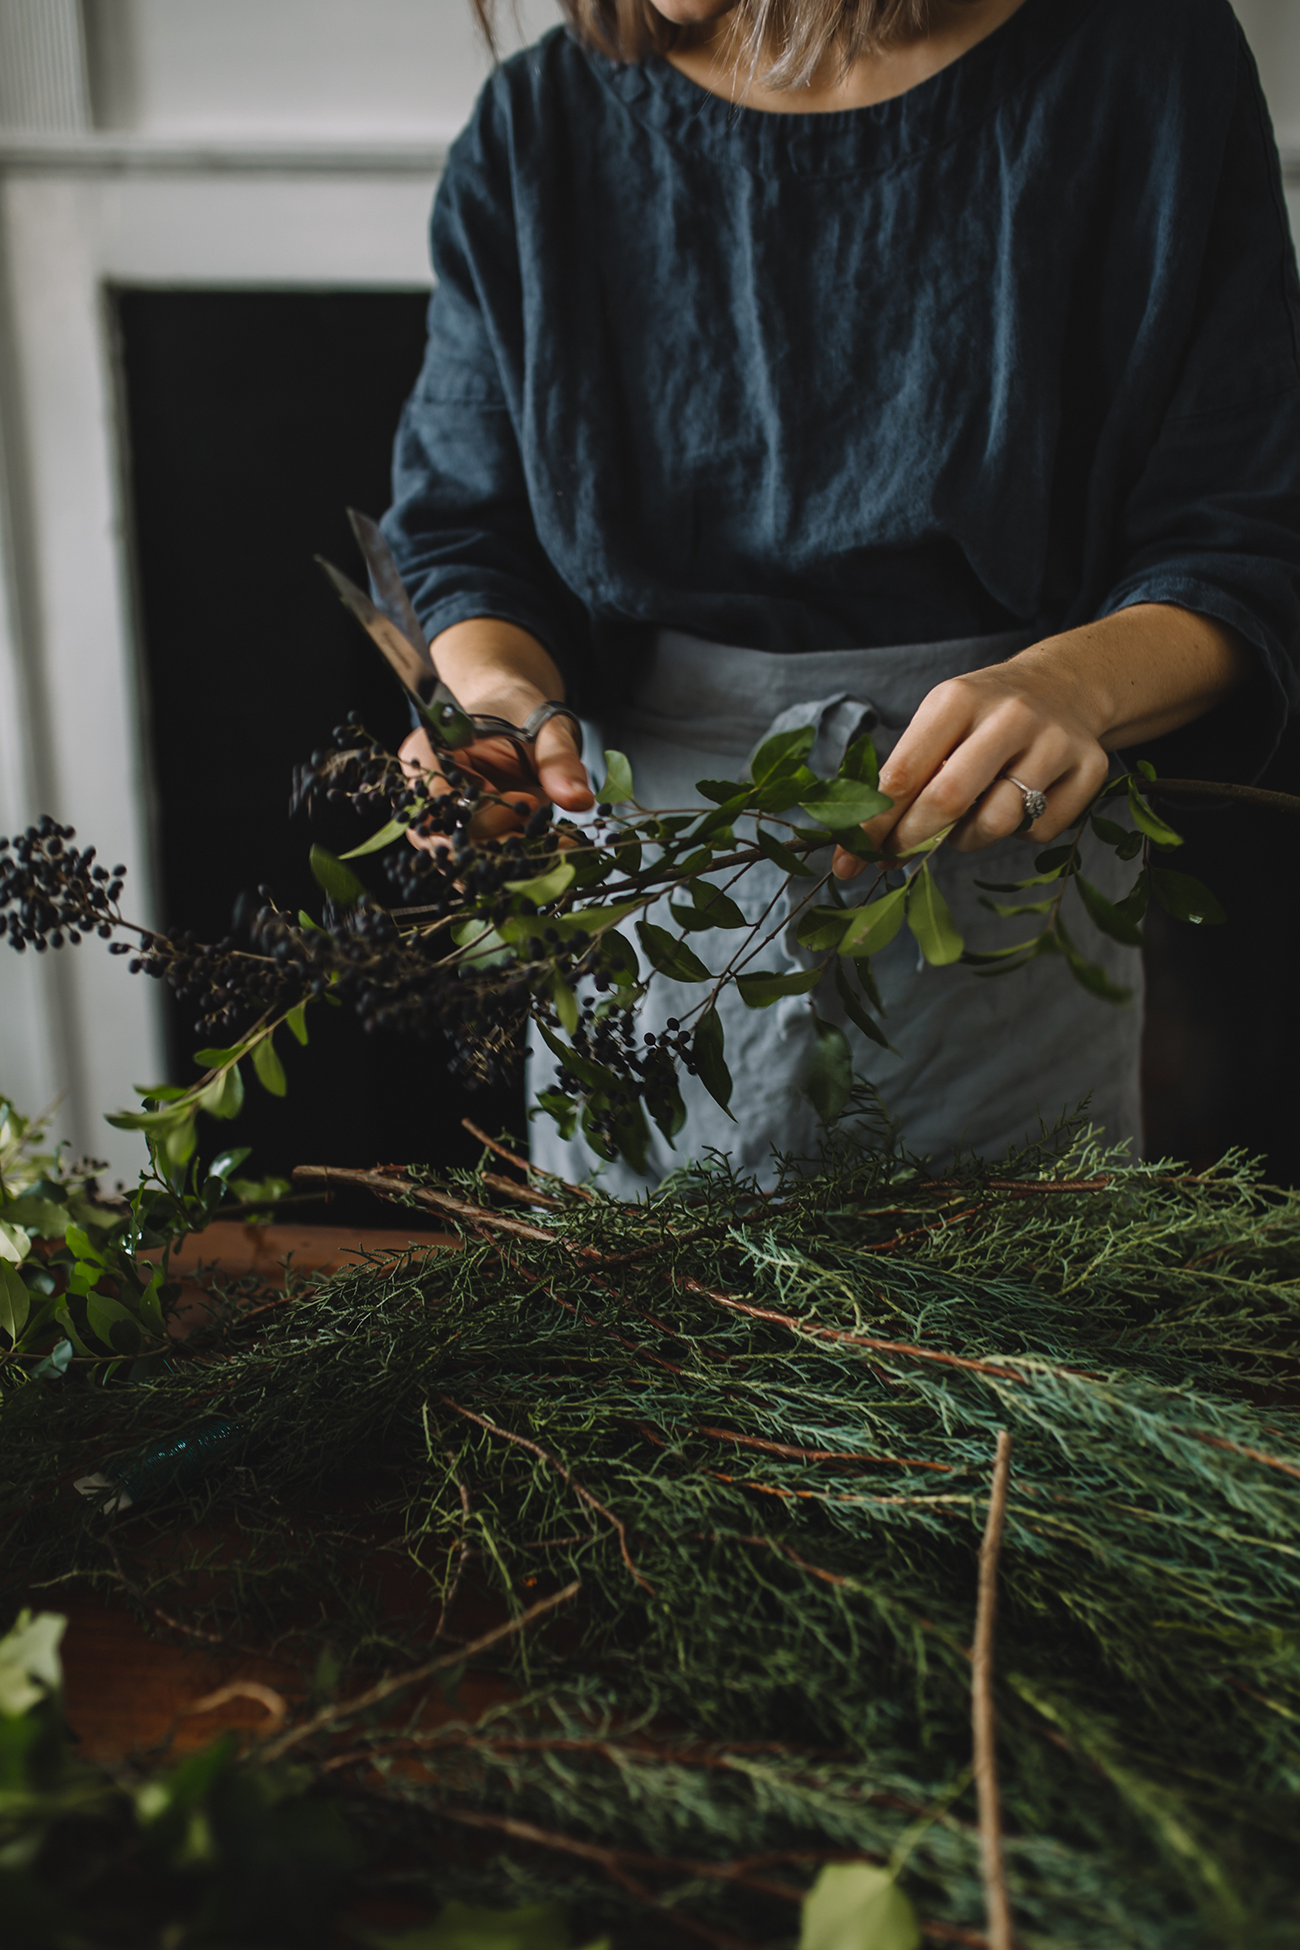 use foraged berries to decorate gifts as you are navigating holiday gift-giving